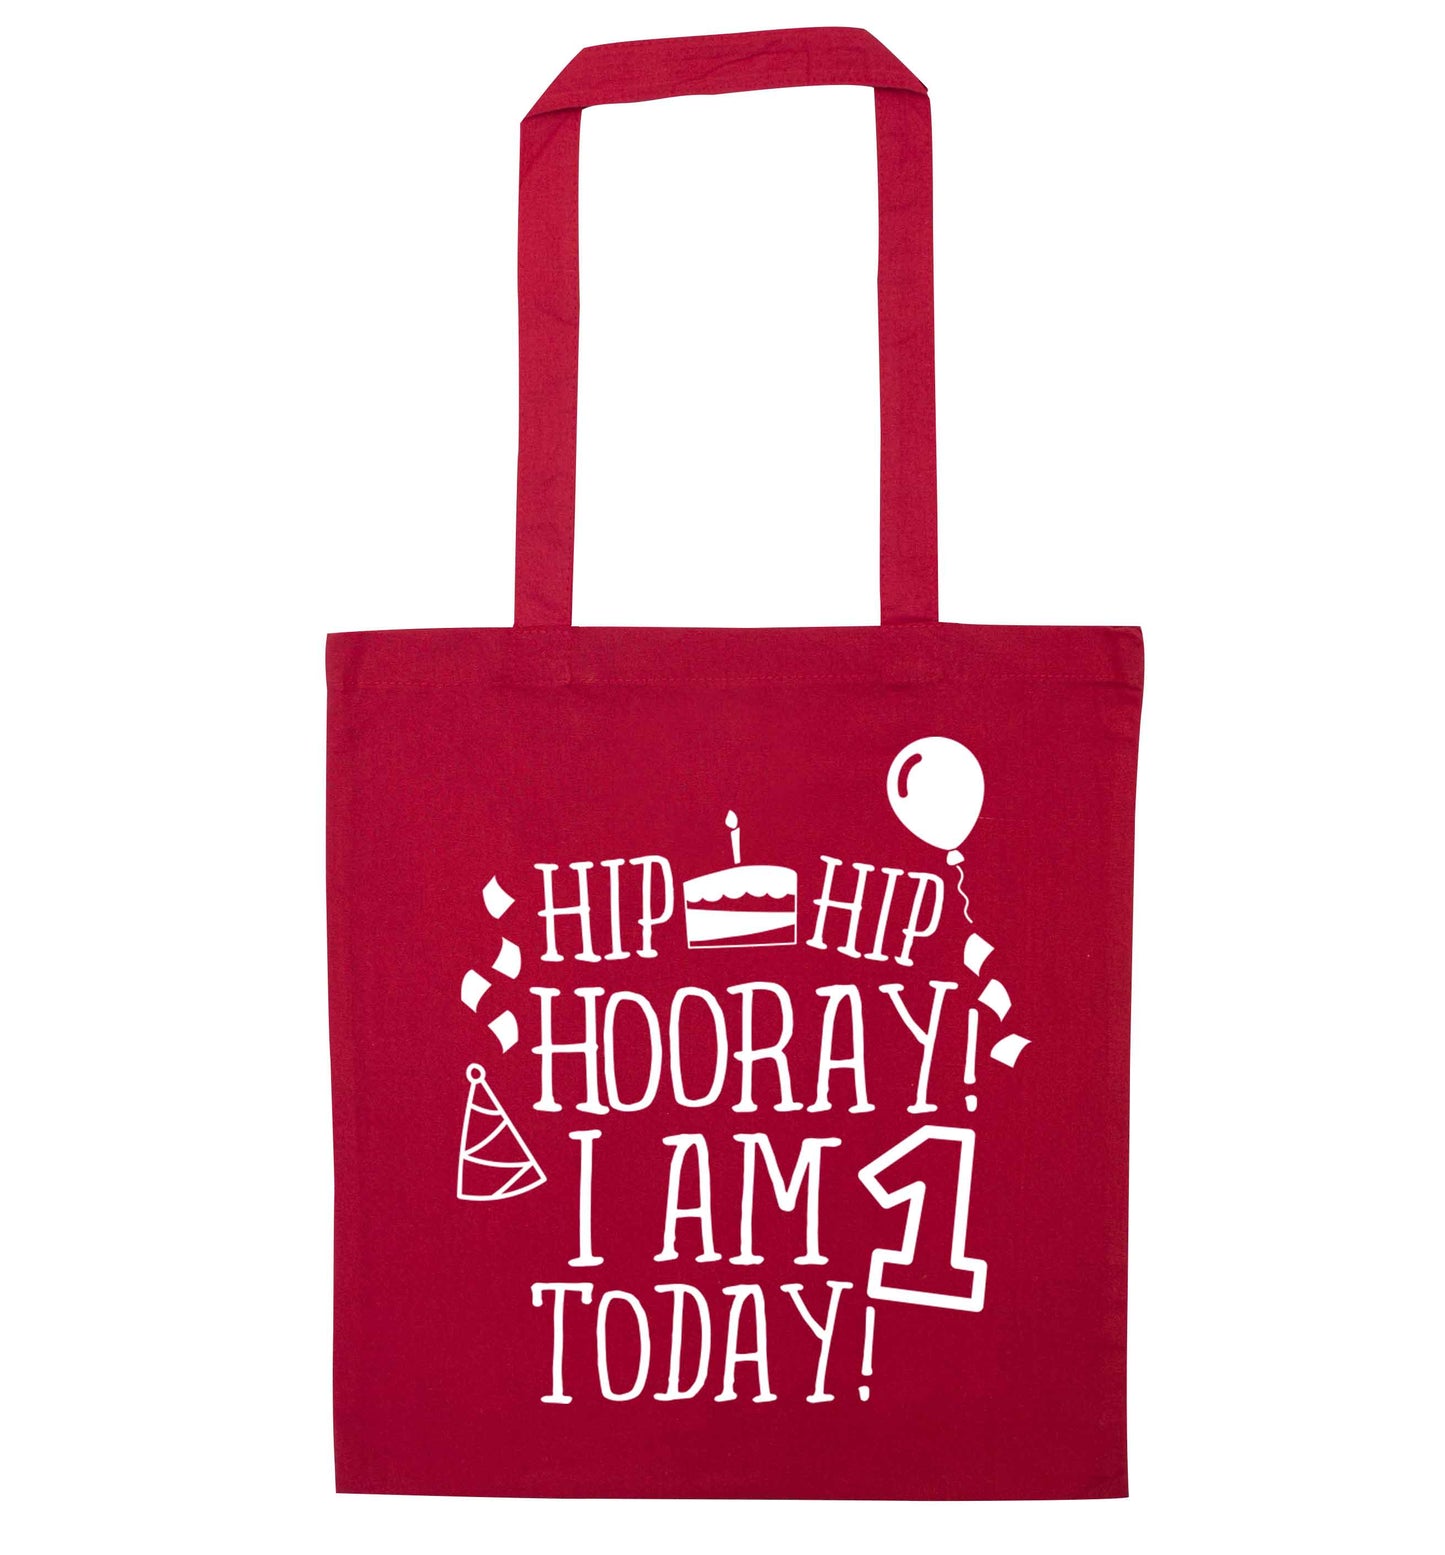 I am One Today red tote bag